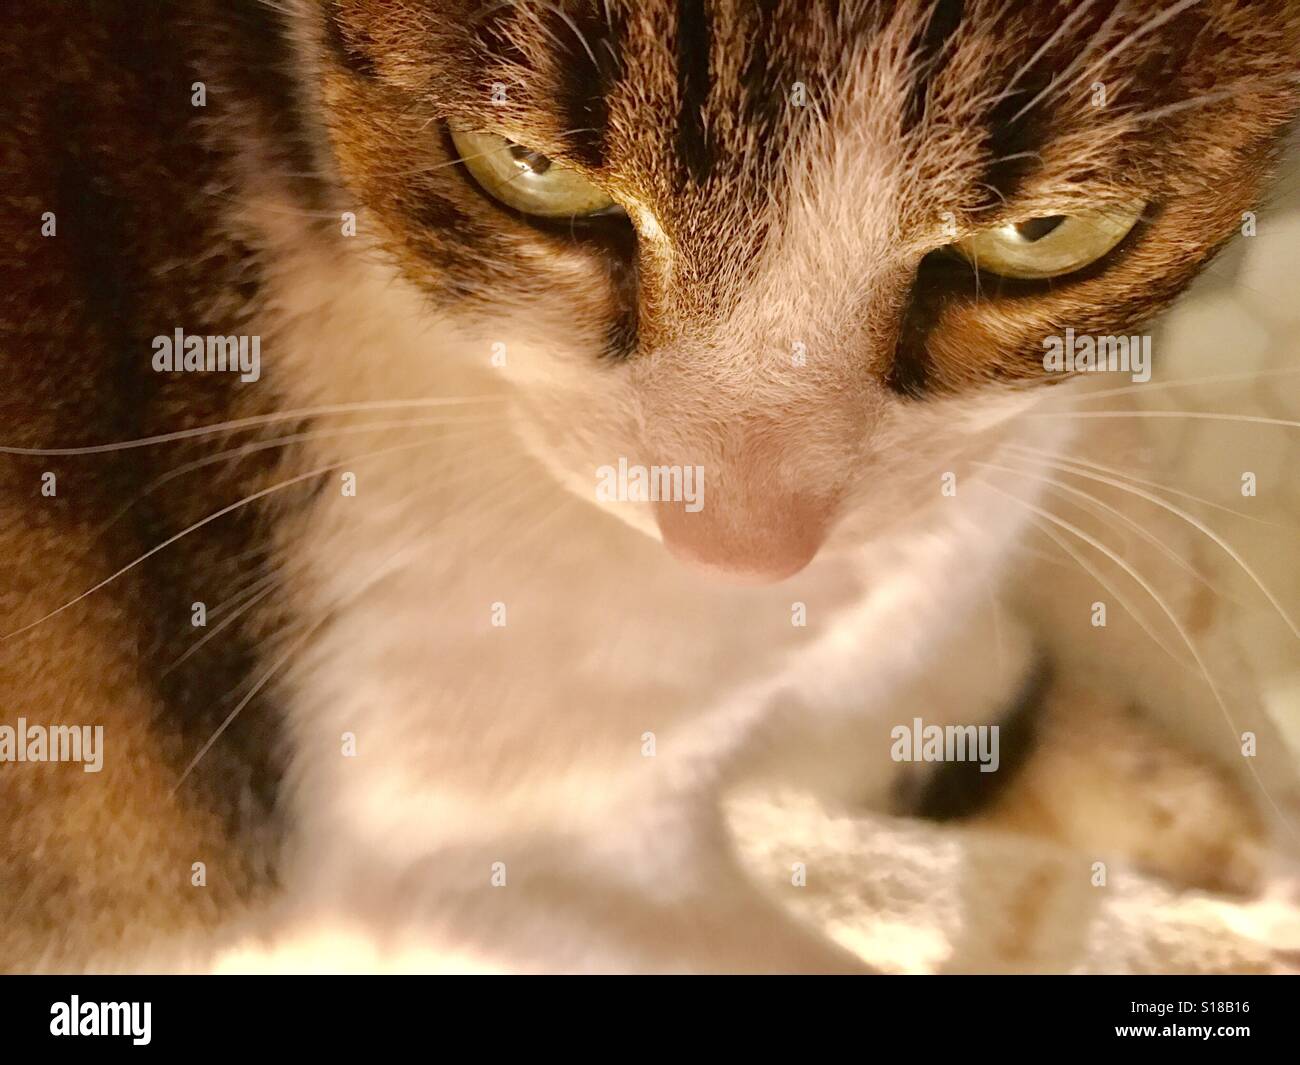 Tabby and white cat's face. Close view. Stock Photo